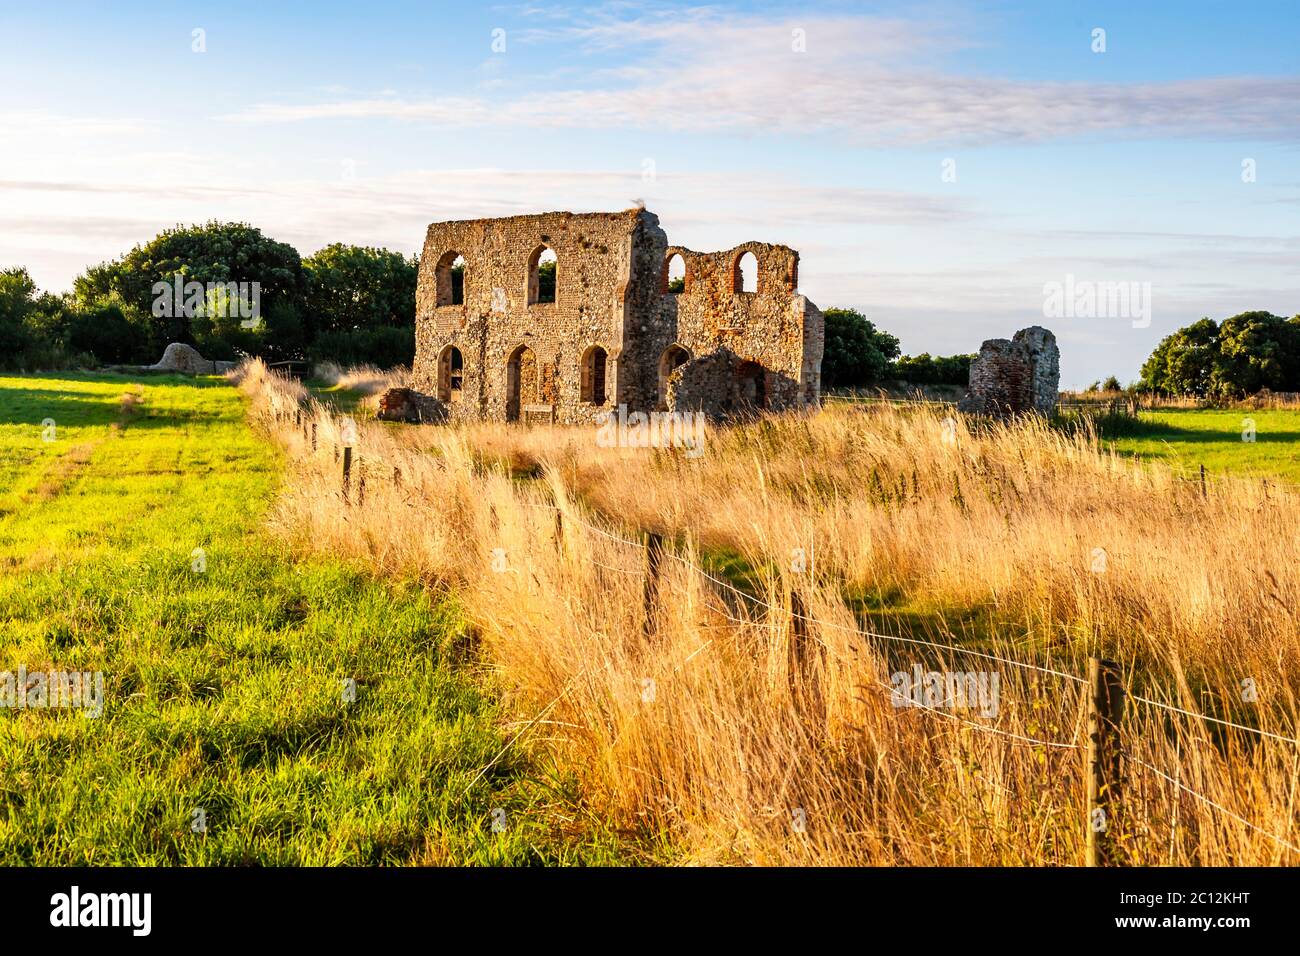 Agricultural ruins near the village of Dunwich, England Stock Photo